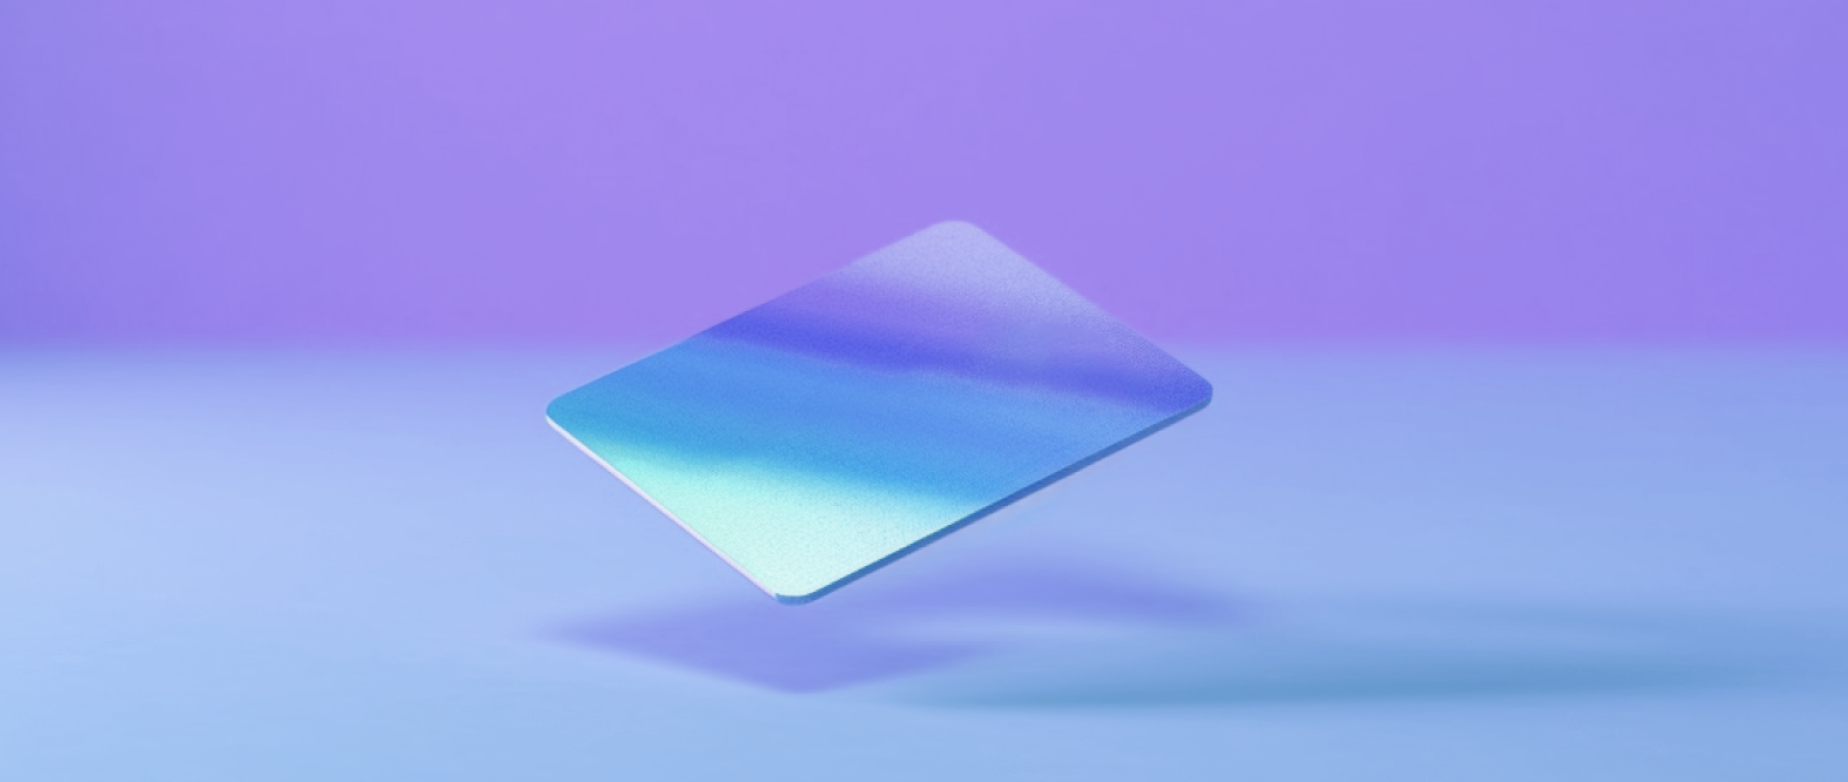 a credit card on a purple and blue background representing building business credit